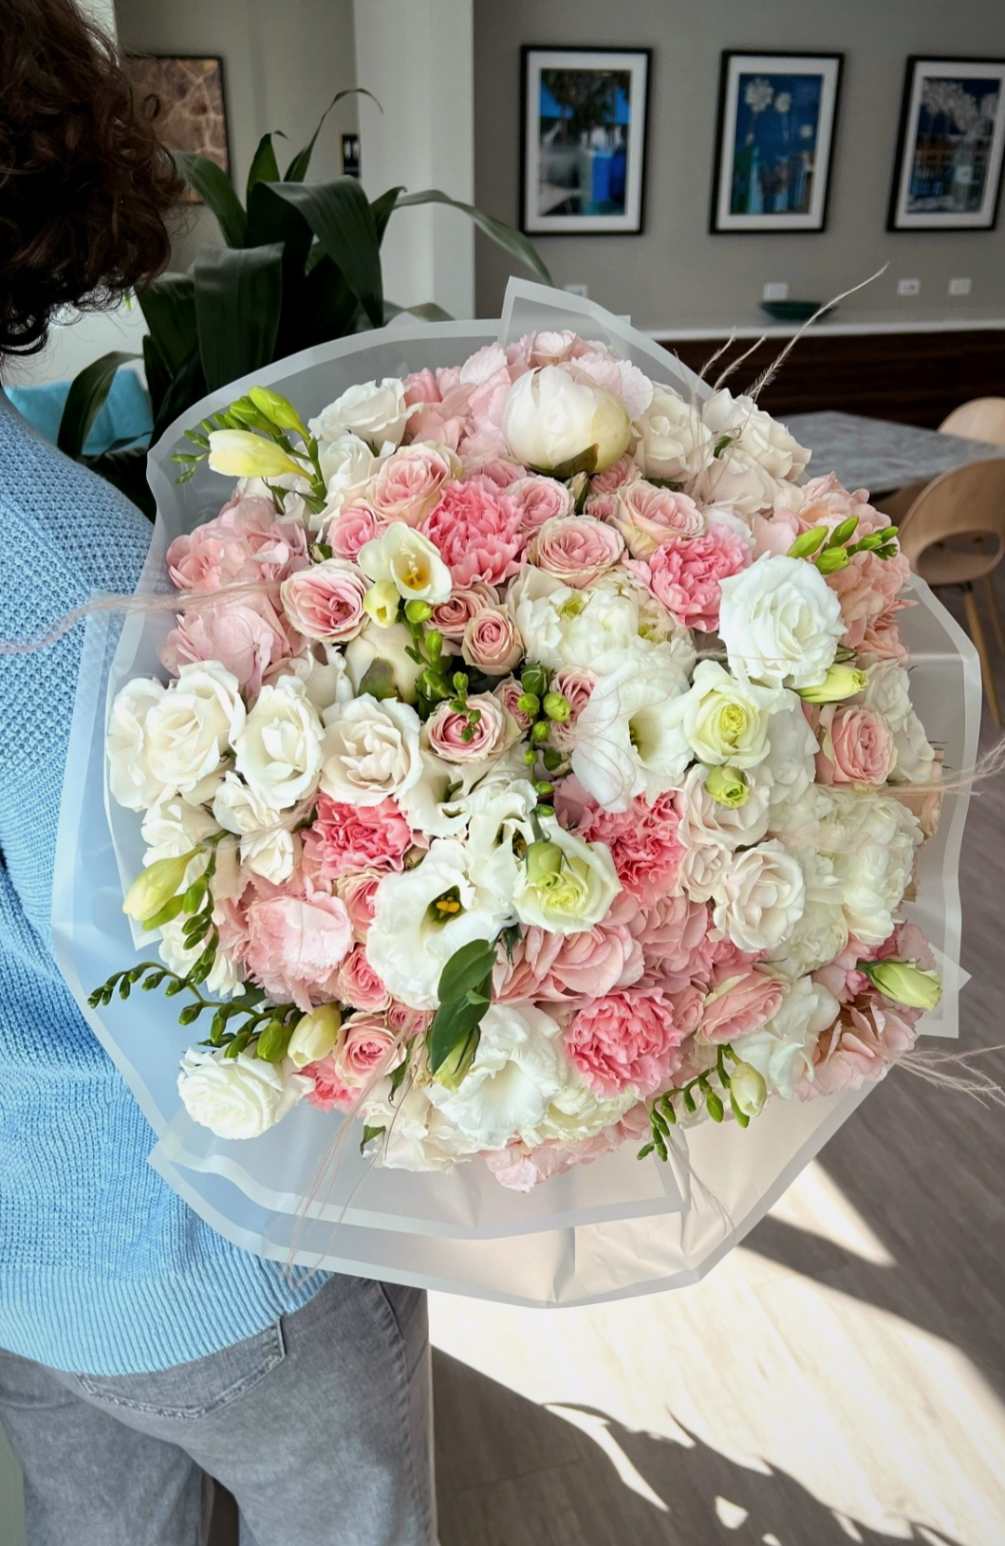 Gorgeous bouquet with hydrangea, peonies, carnation, eustoma, spray roses and freesia